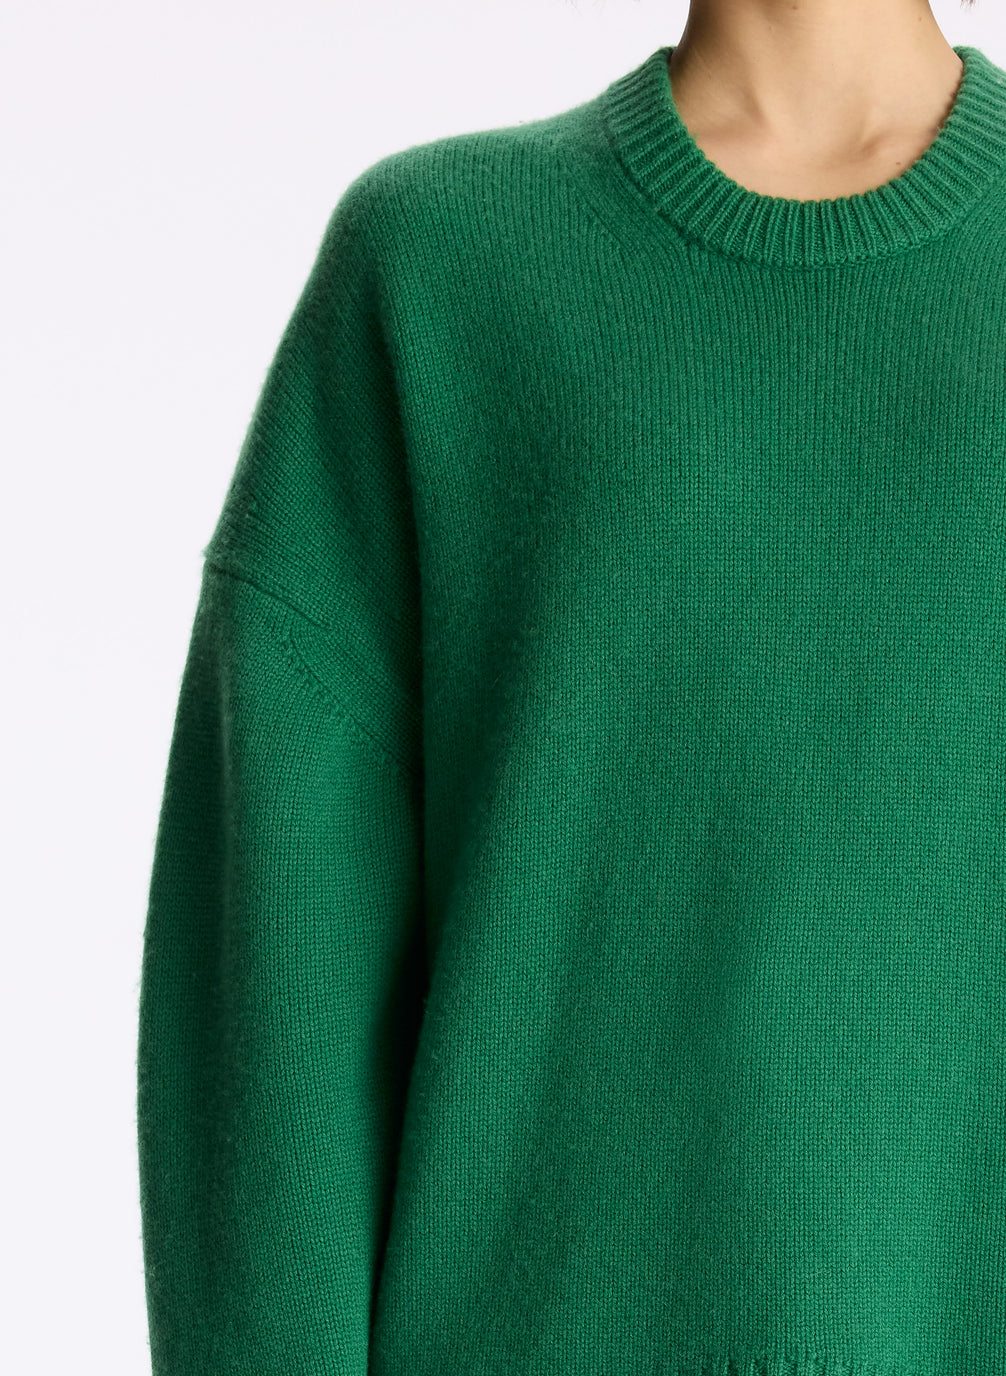 detail view of woman wearing green cashmere long sleeve sweater